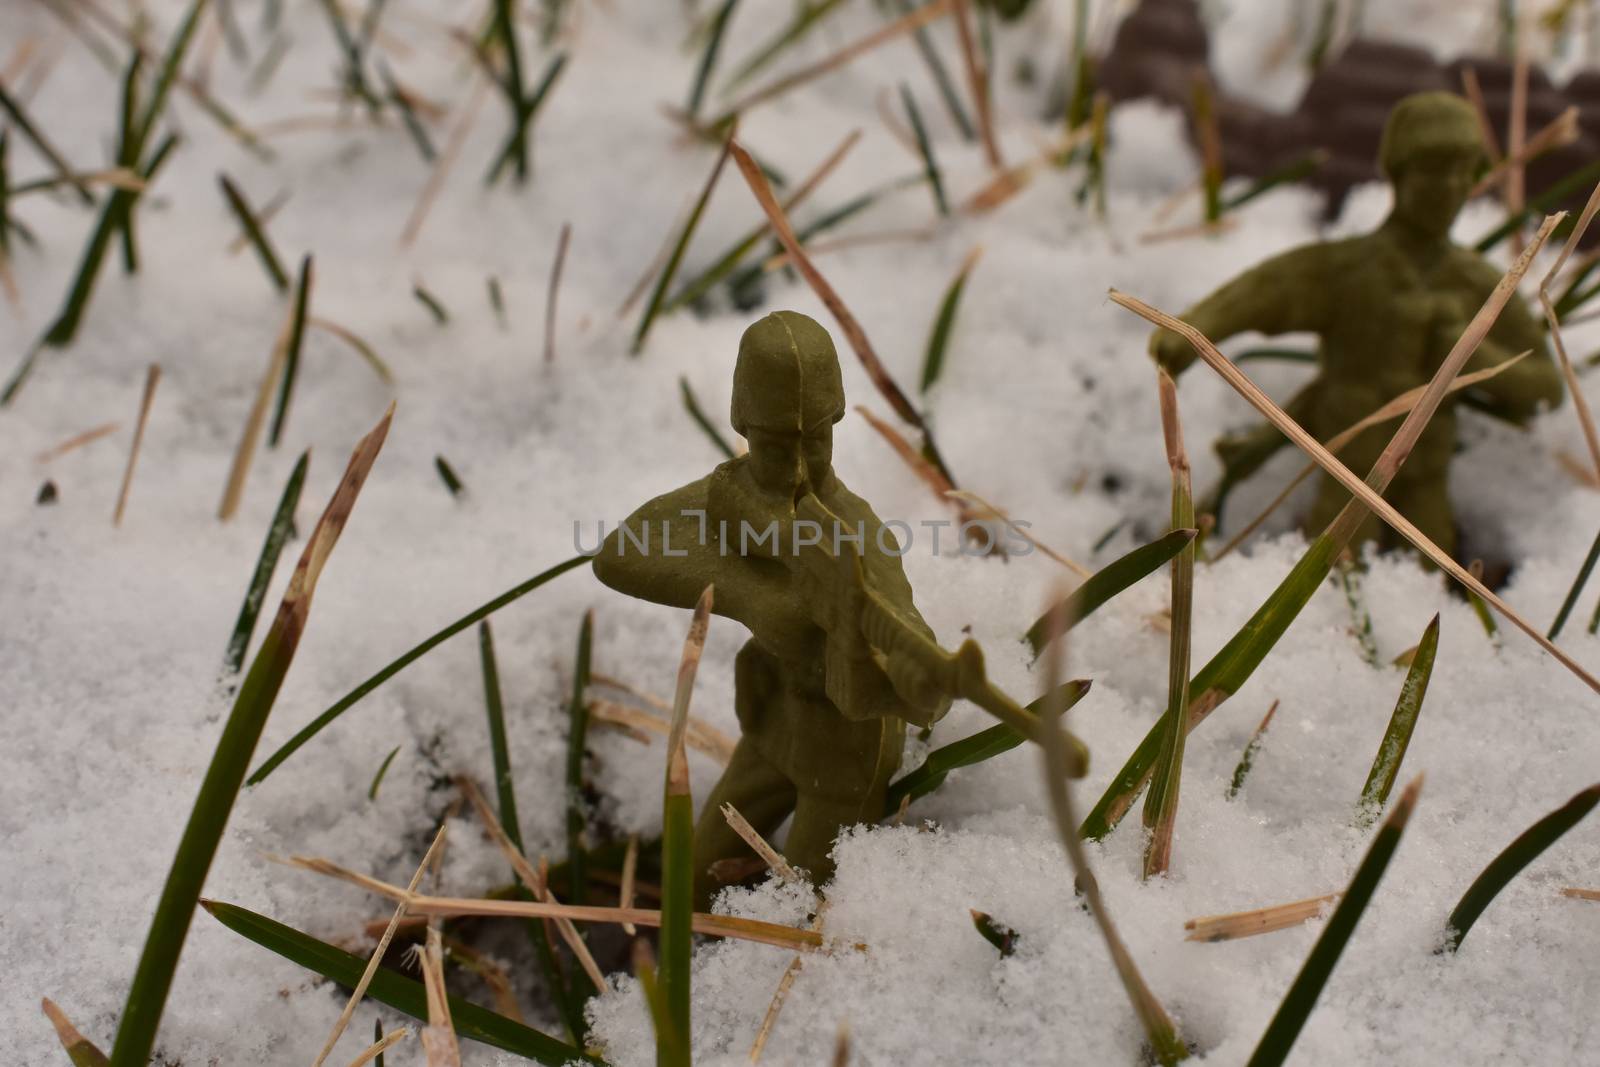 A Toy Soldier Taking Aim and Ready to Fight in a Snowy Field by bju12290